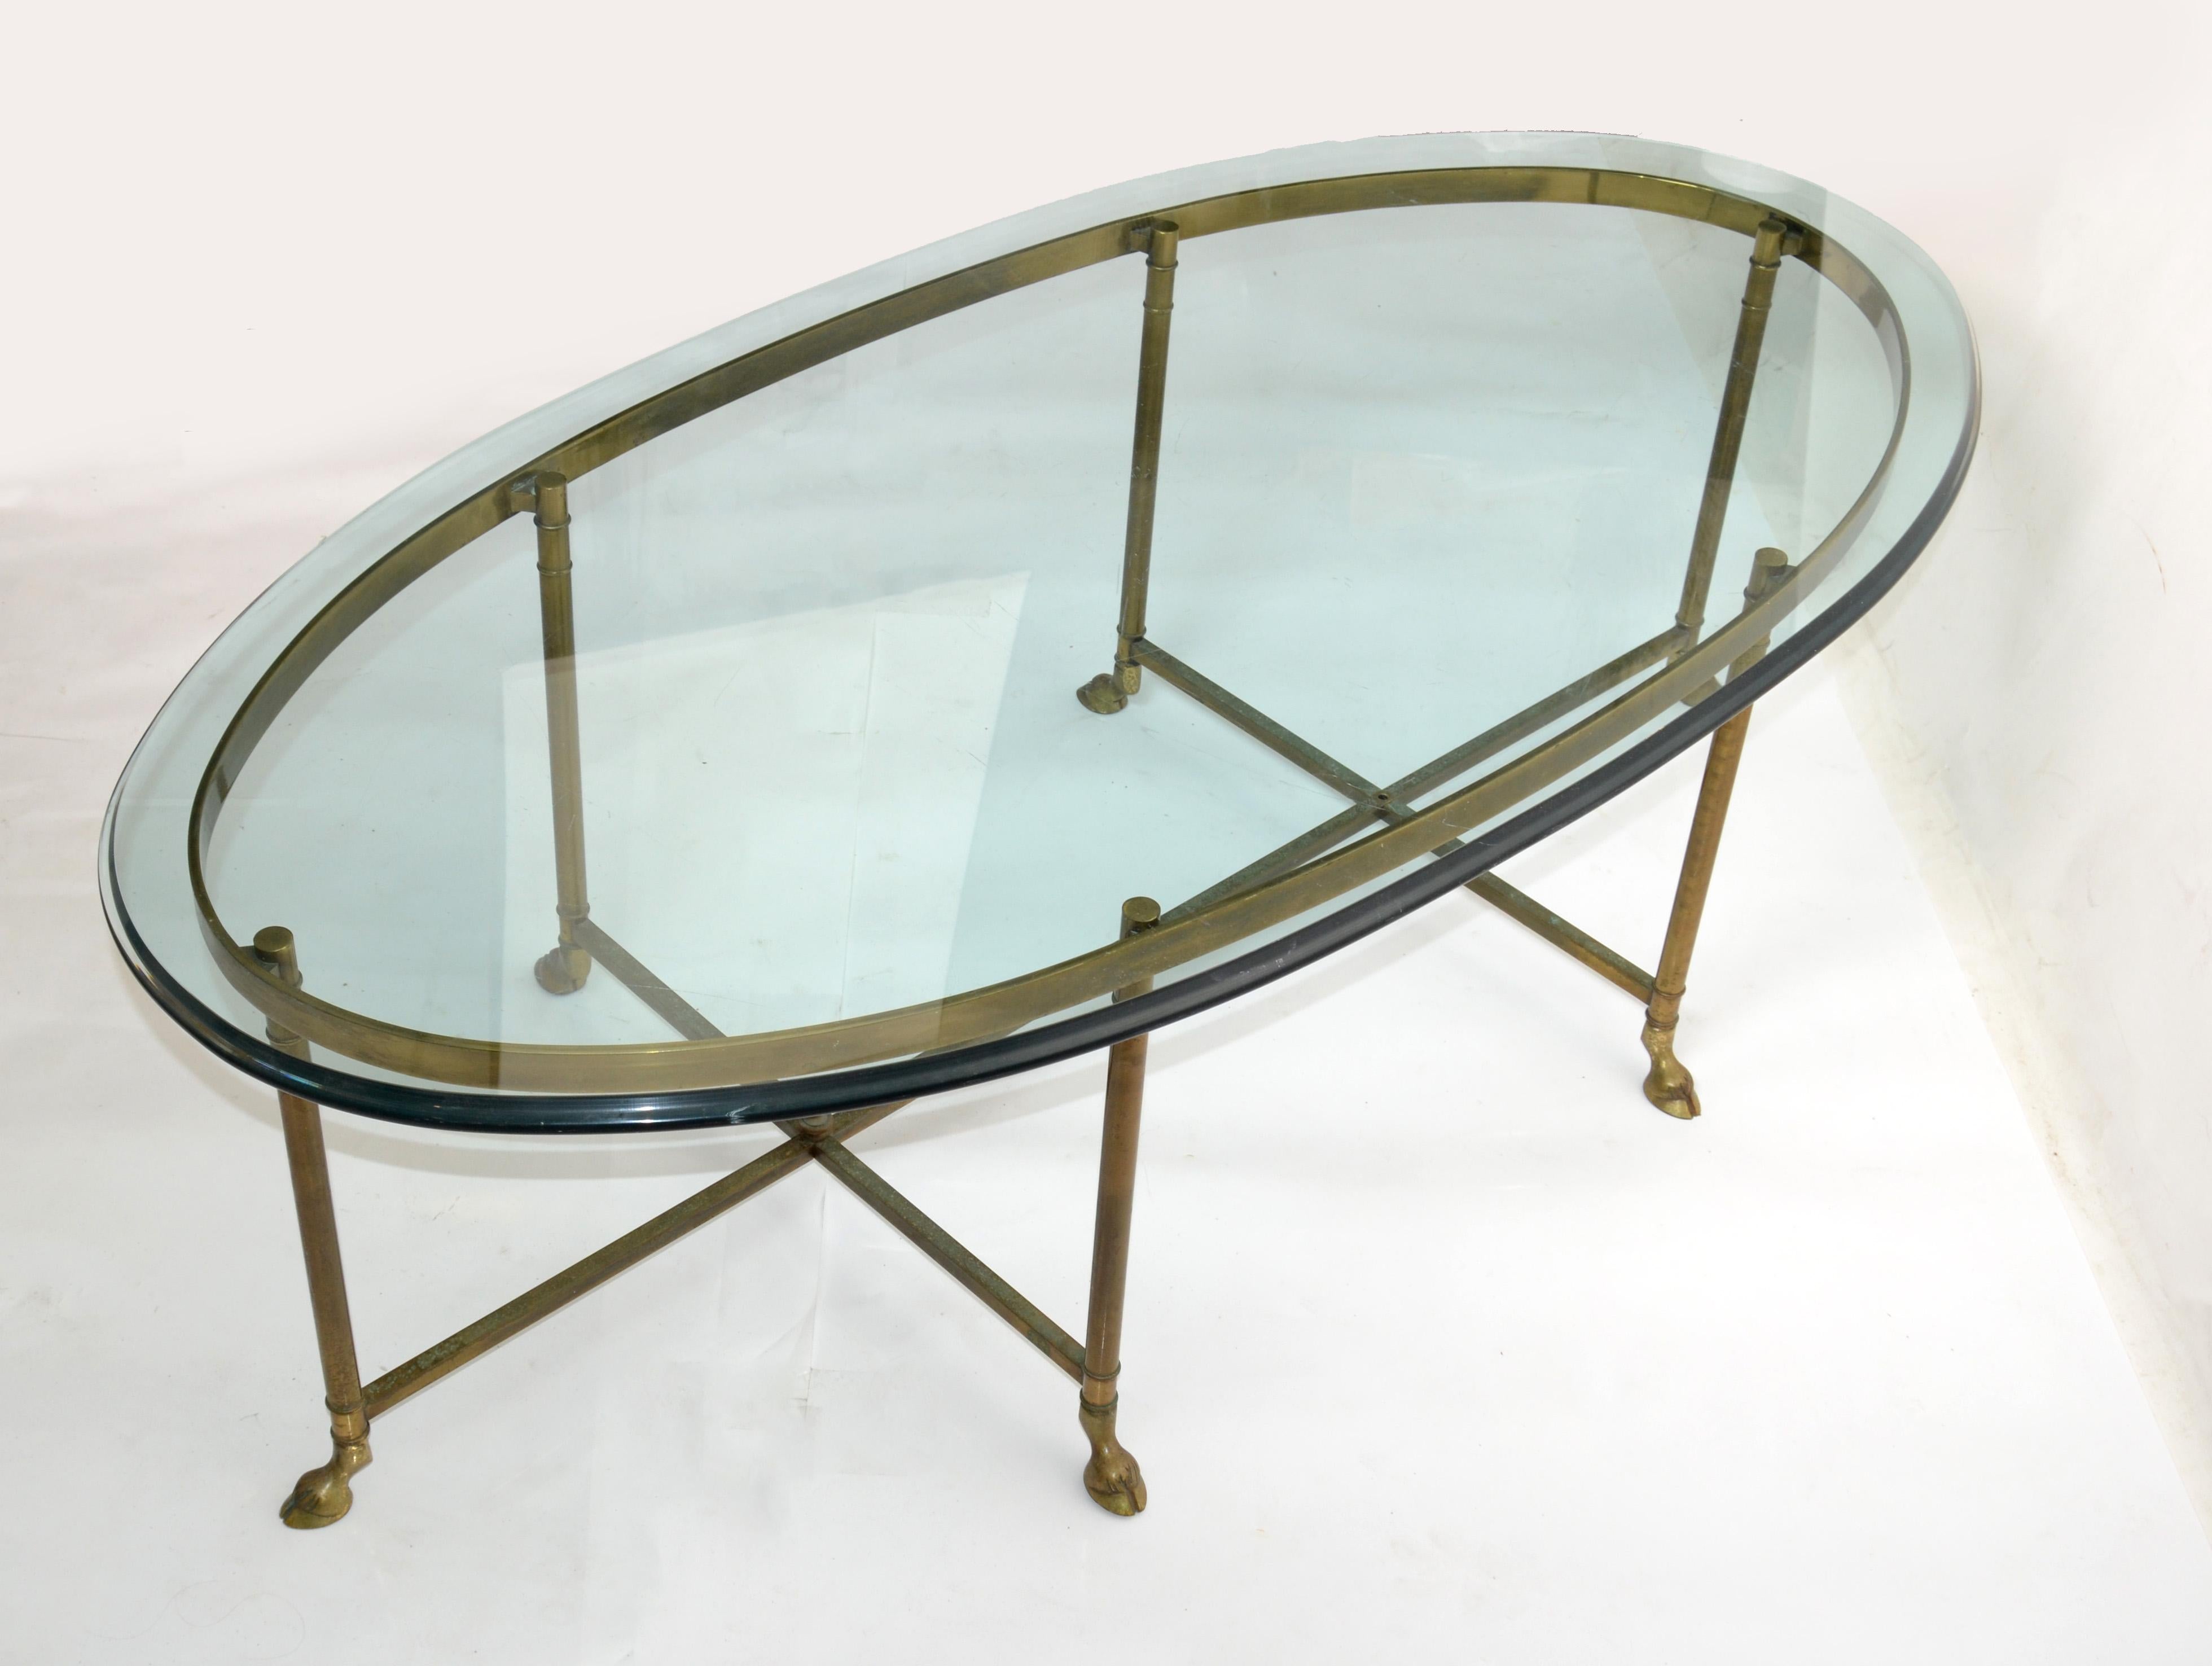 Hollywood Regency Mastercraft Brass Hoof Feet Coffee Table Racetrack Glass Top In Good Condition For Sale In Miami, FL